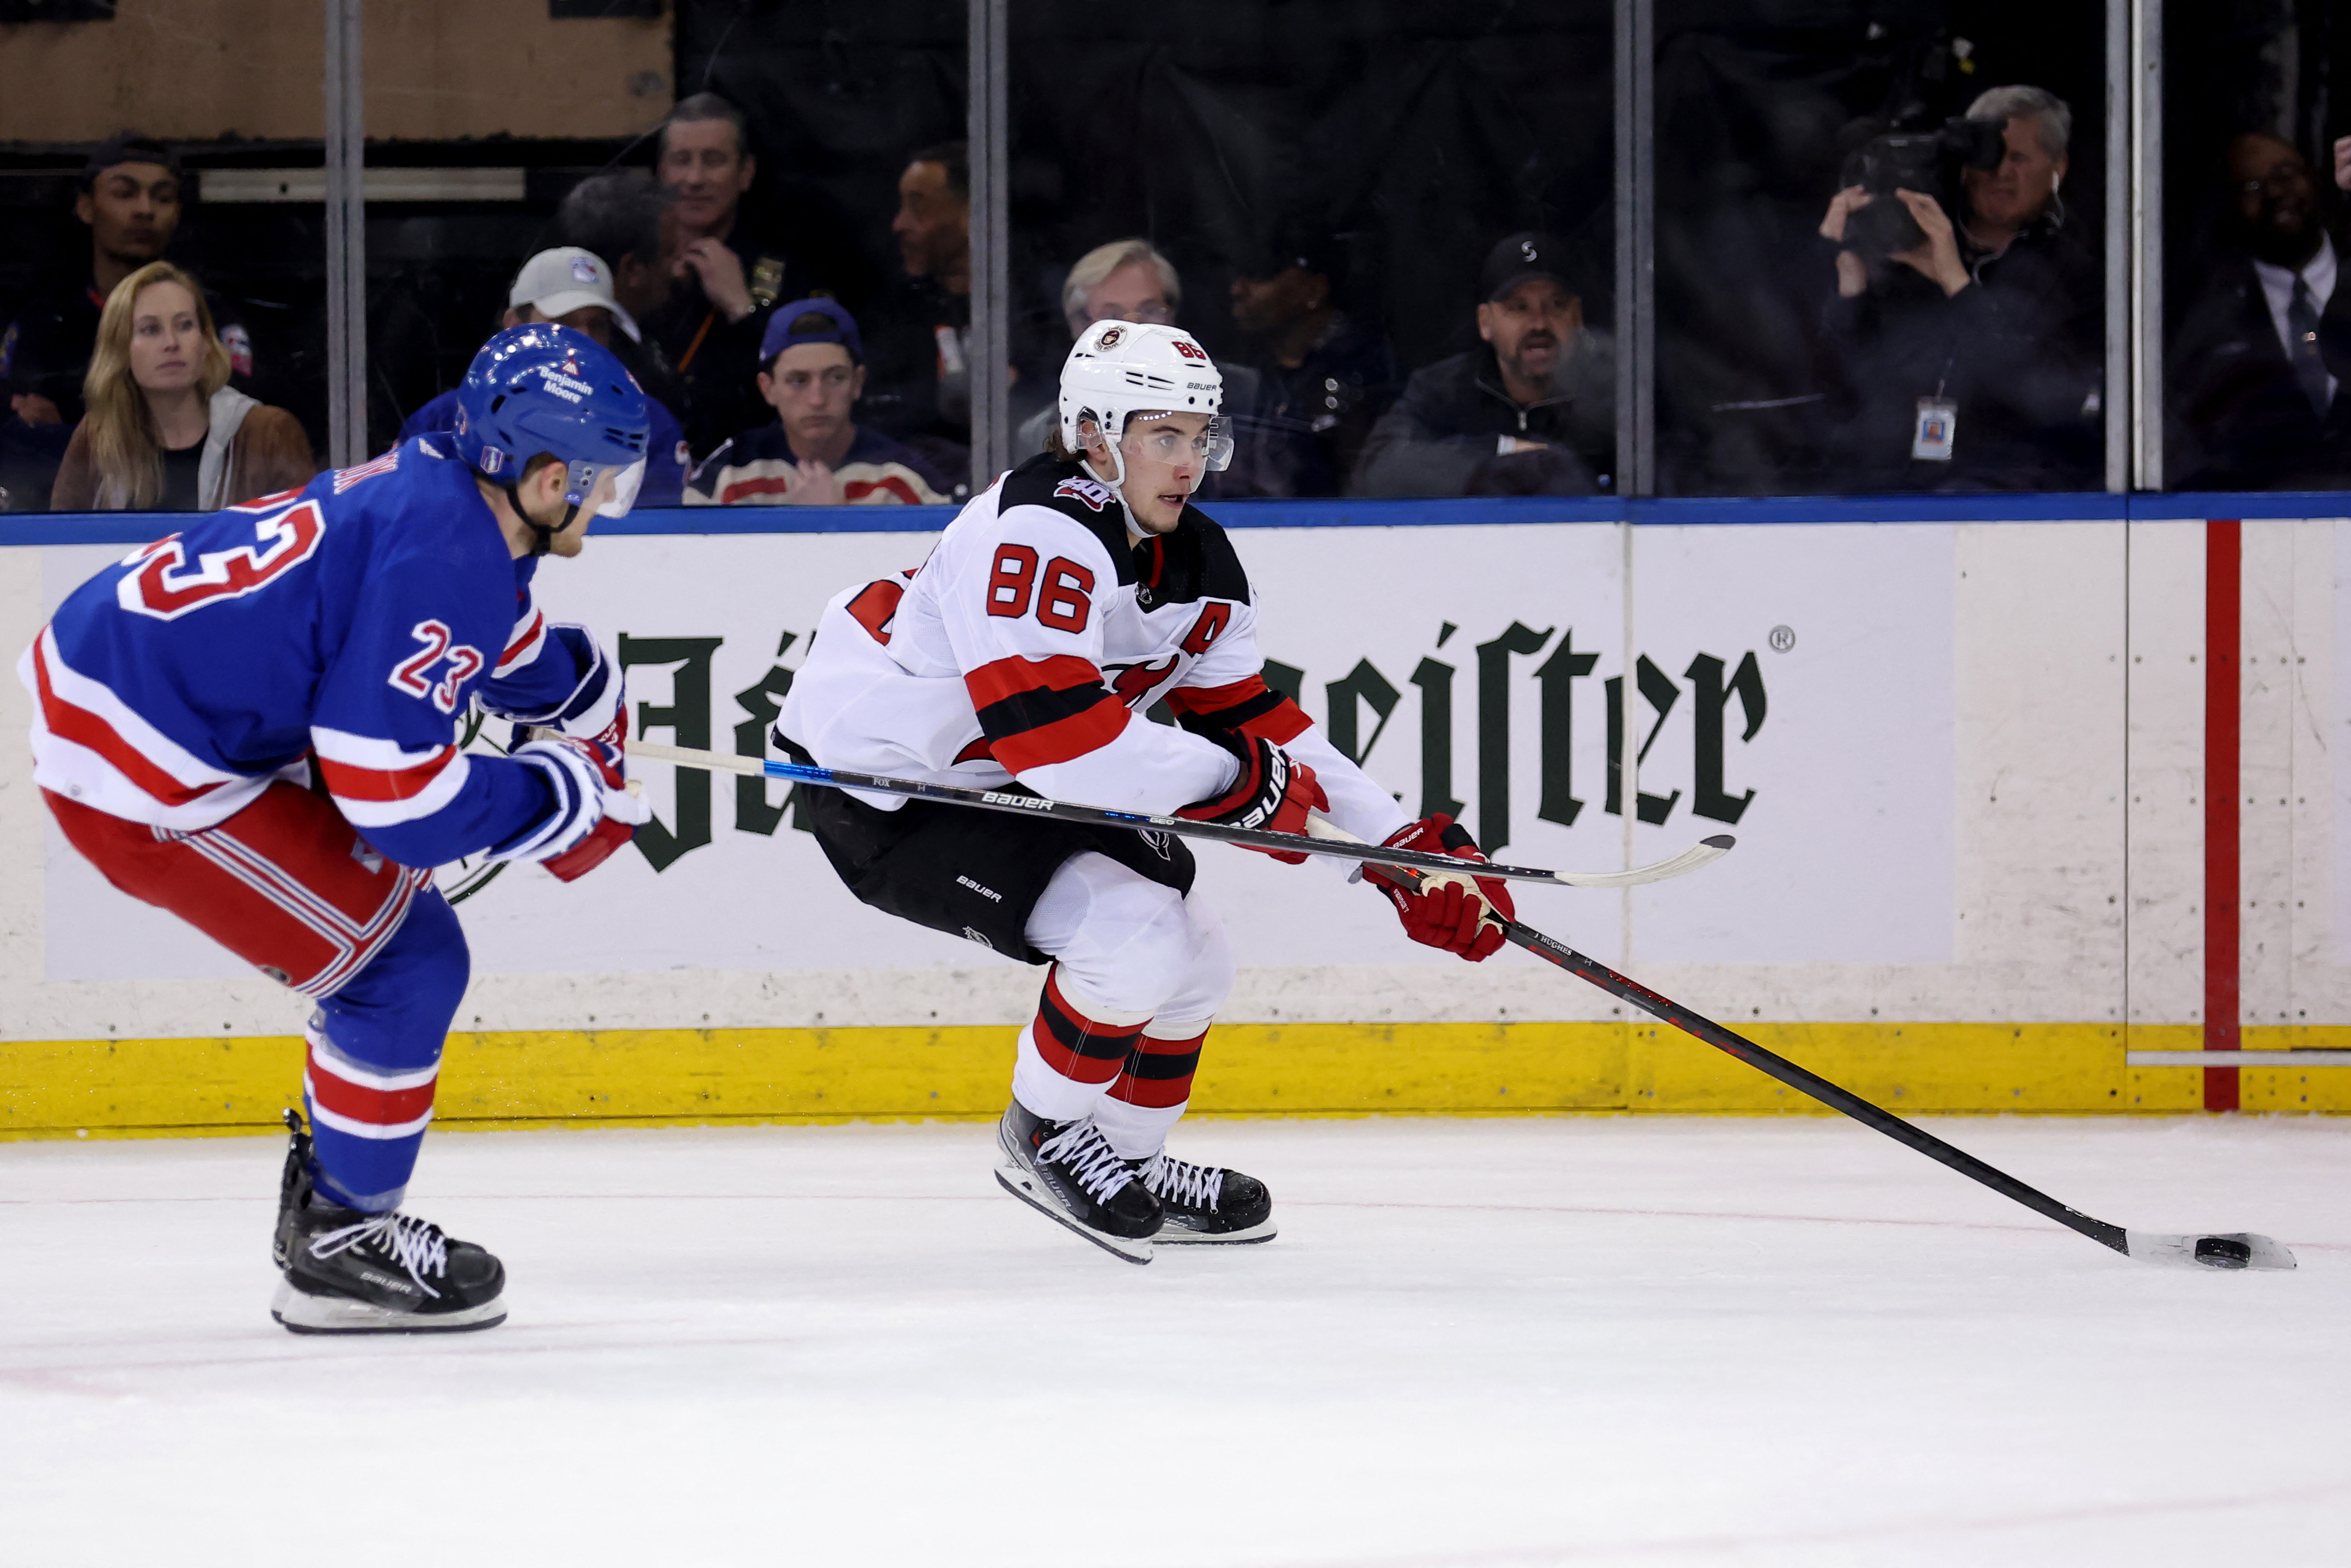 No Rust for the Wicked: Devils Return and Win 5-2 over the Rangers